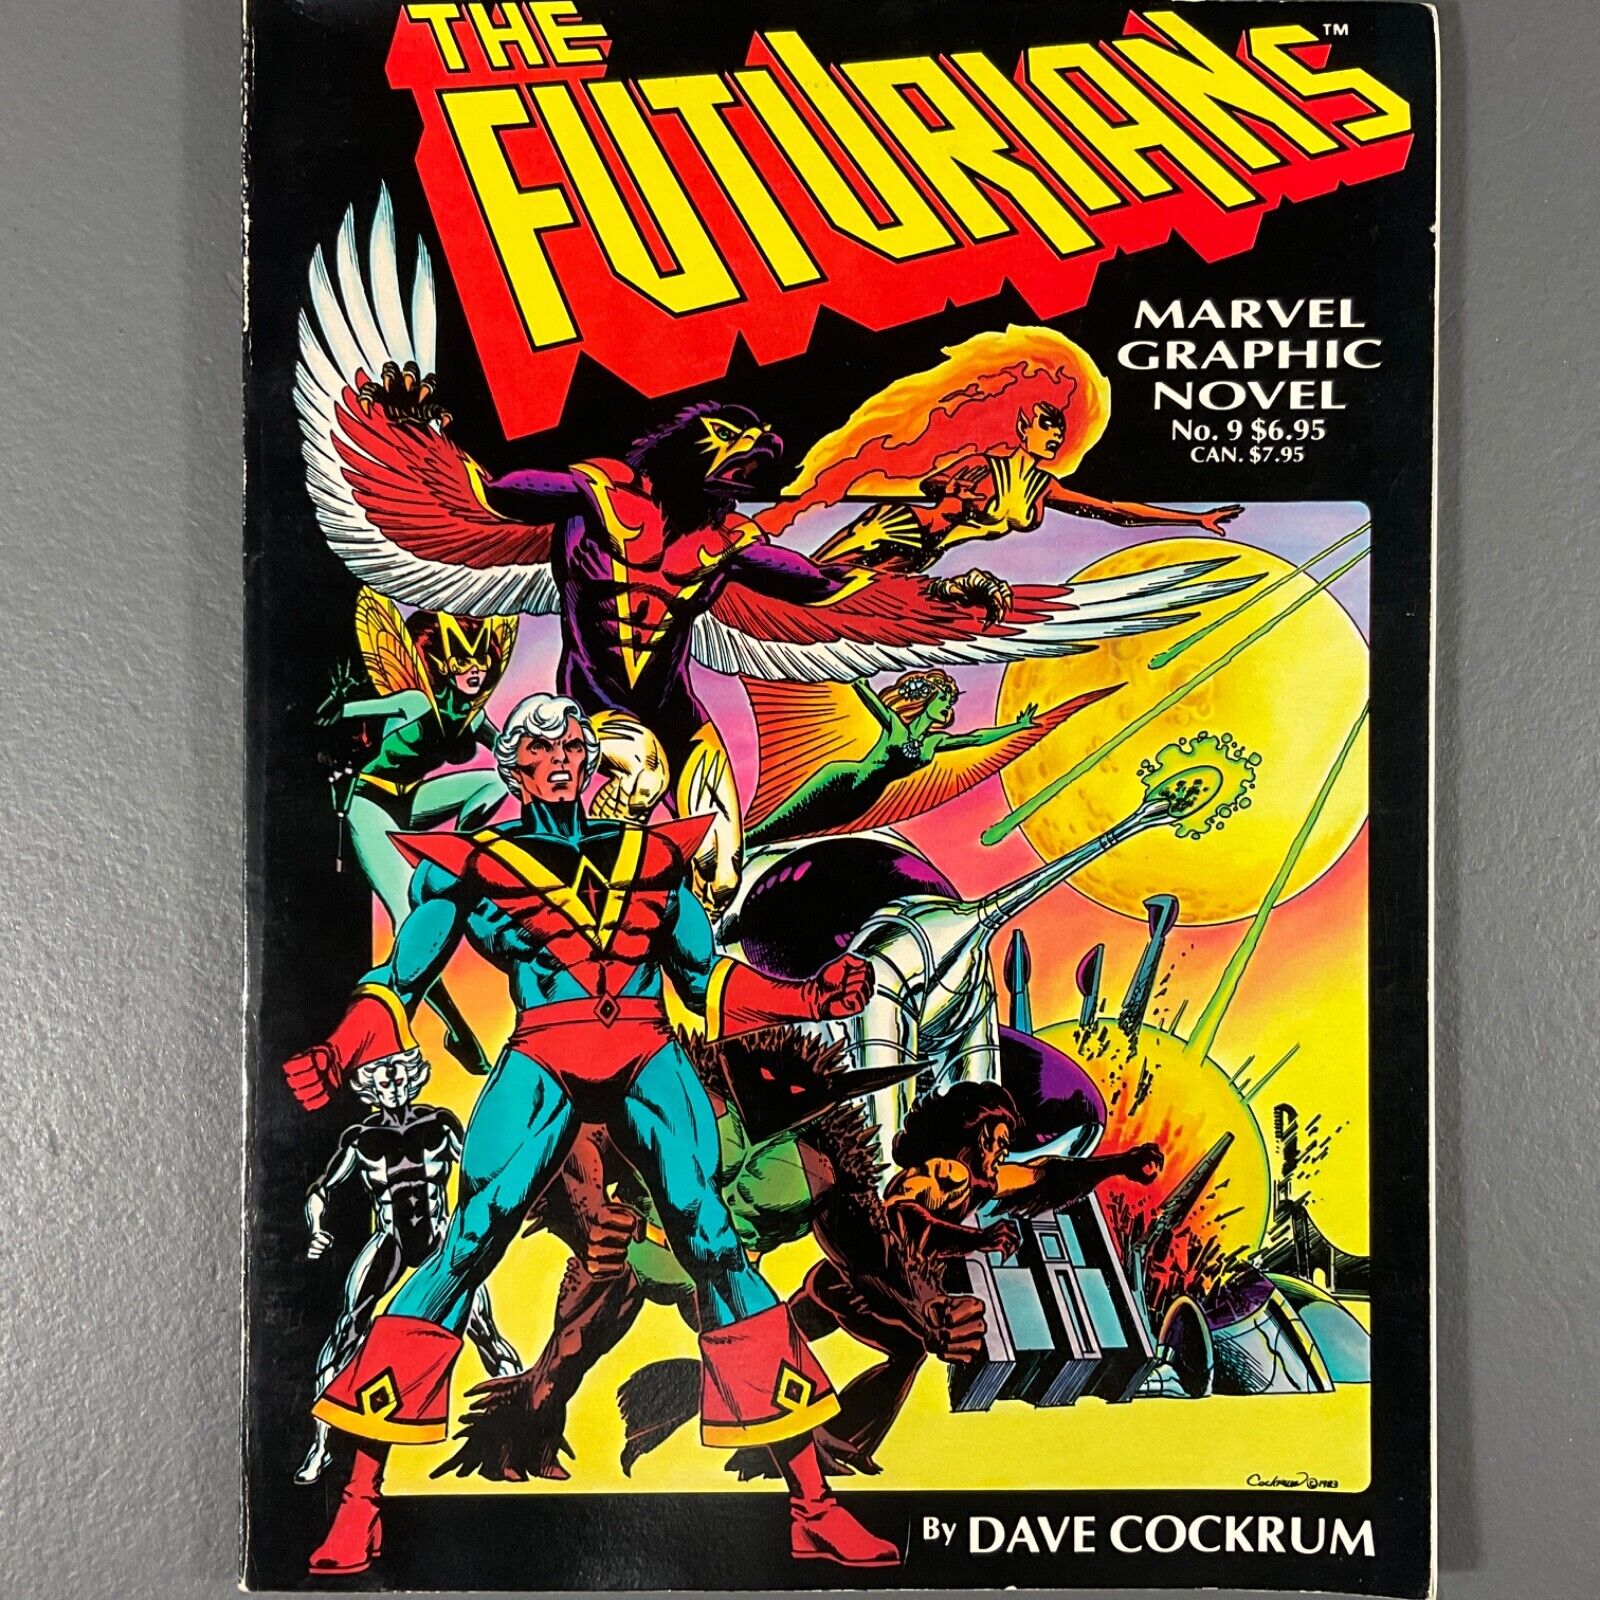 The Futurians Vintage Marvel Universe Graphic Novel by Dave Cockrum Issue #9